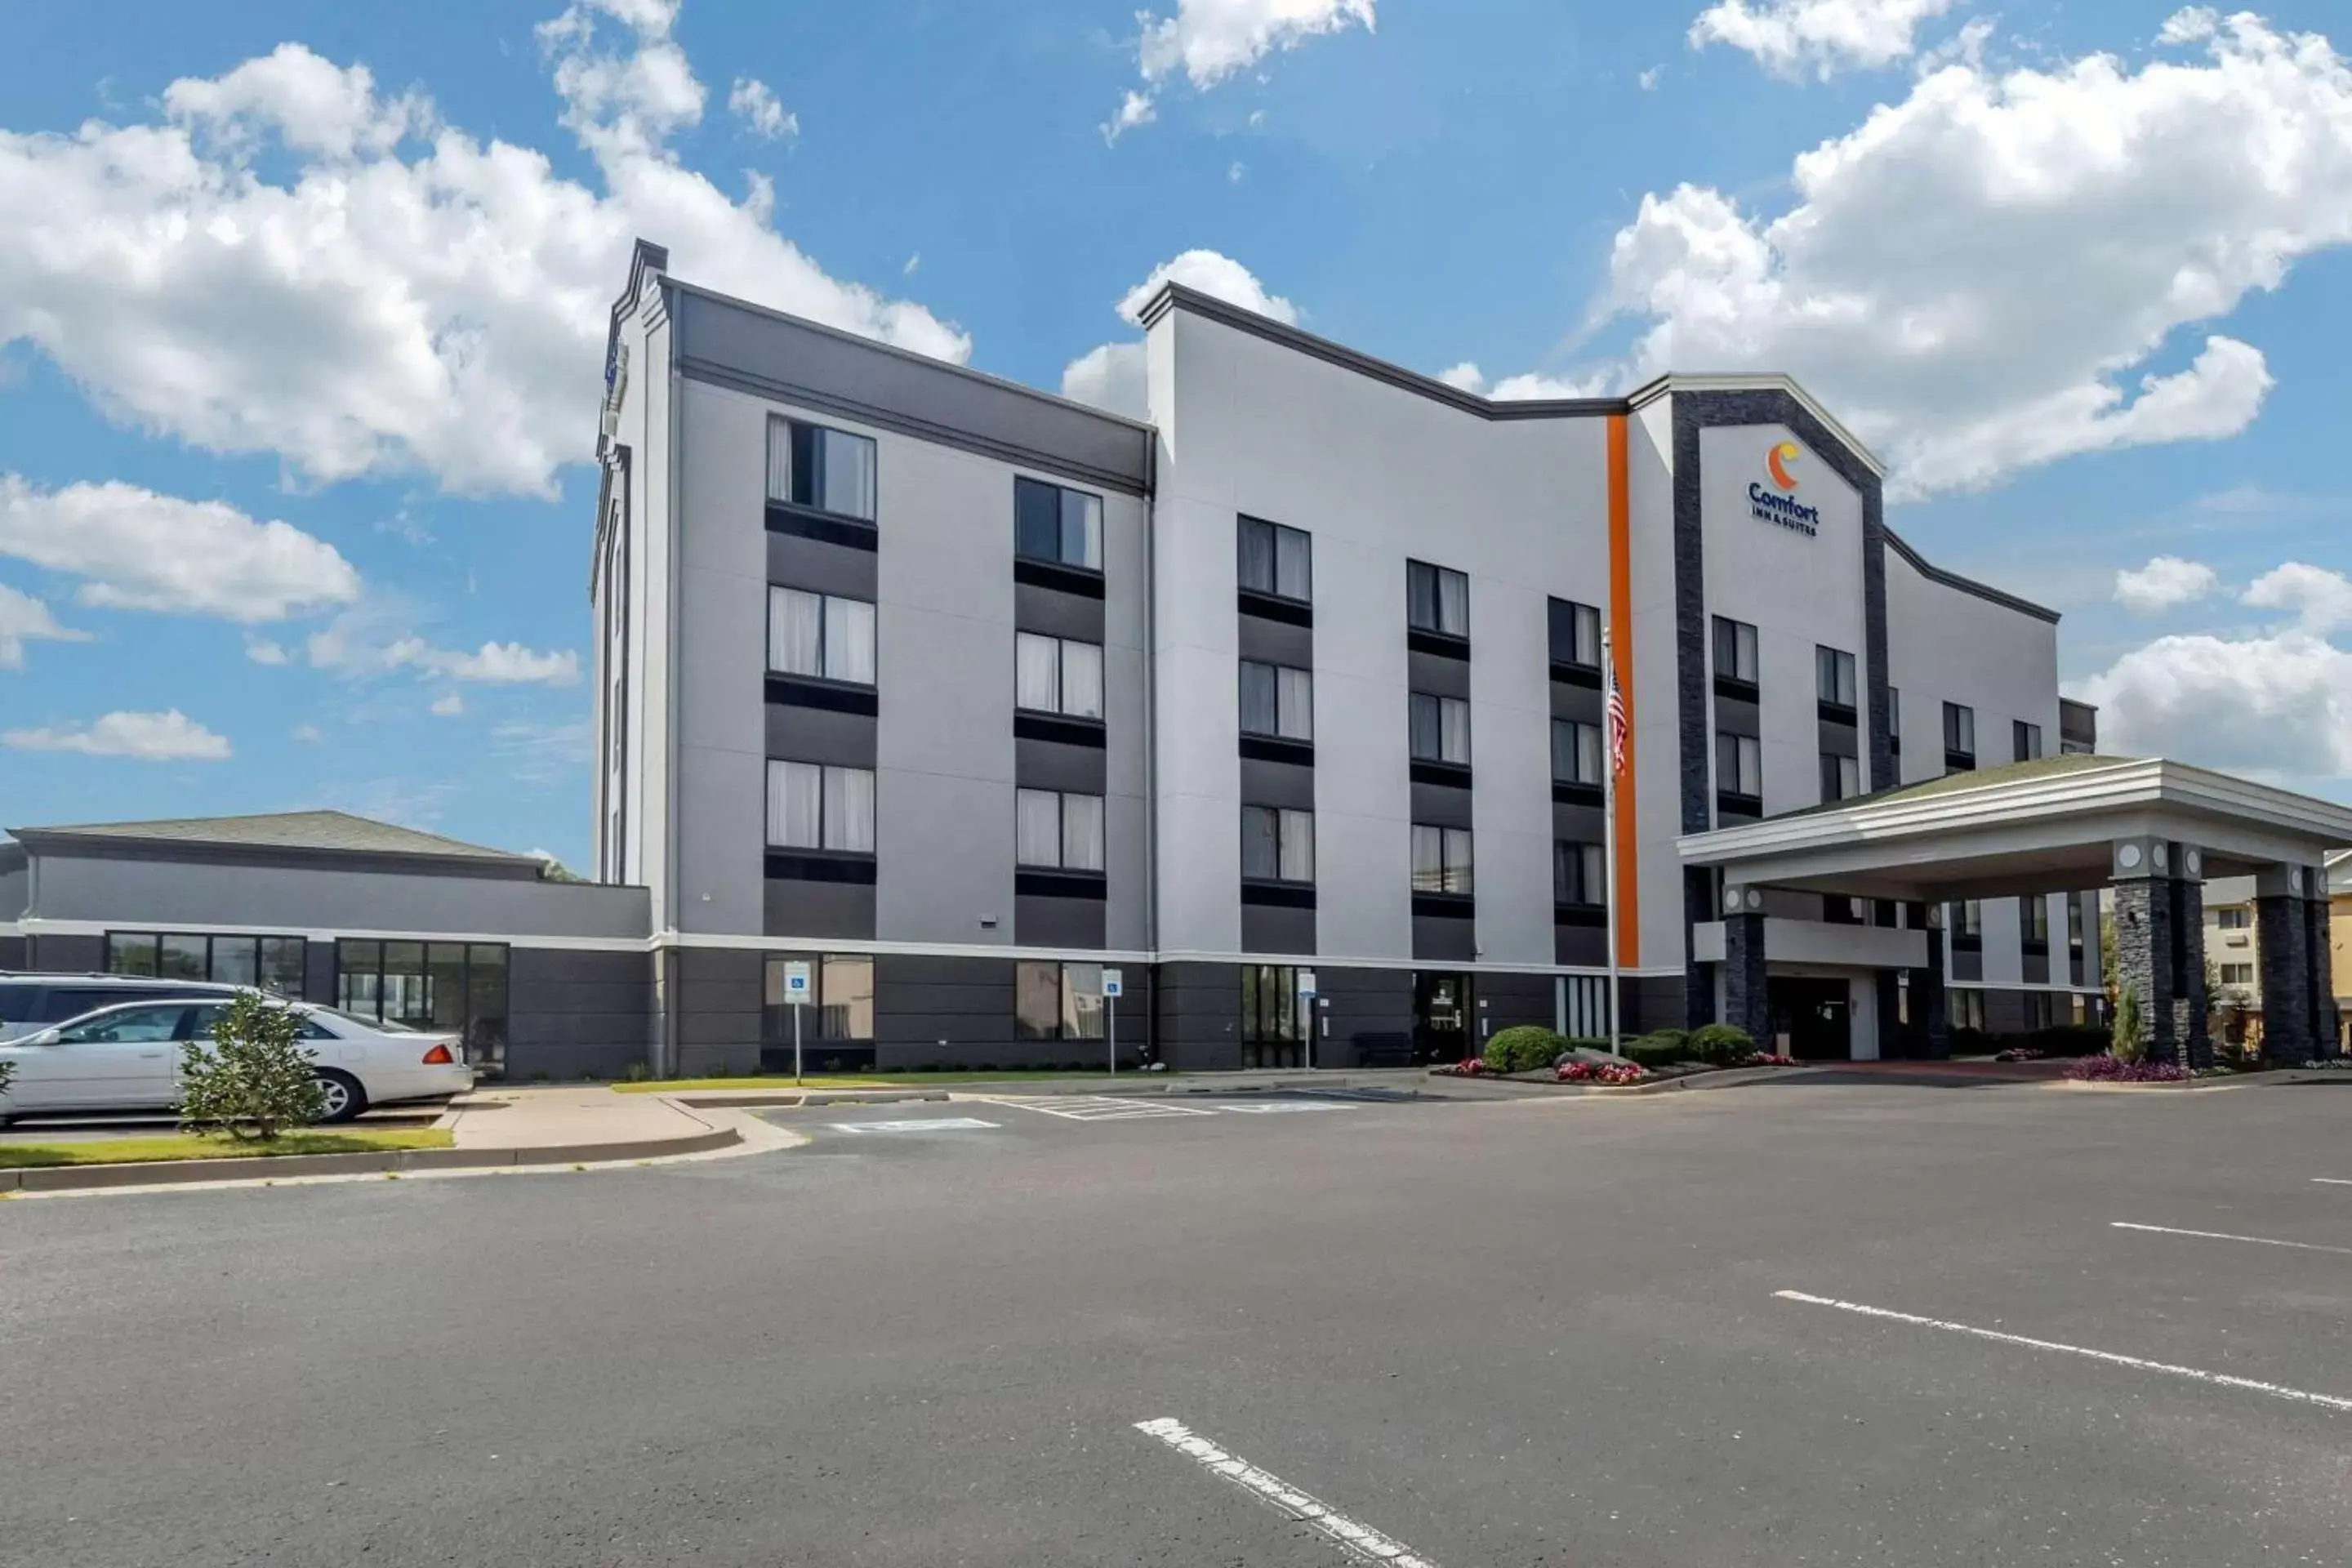 Property Building in Comfort Inn and Suites Quail Springs